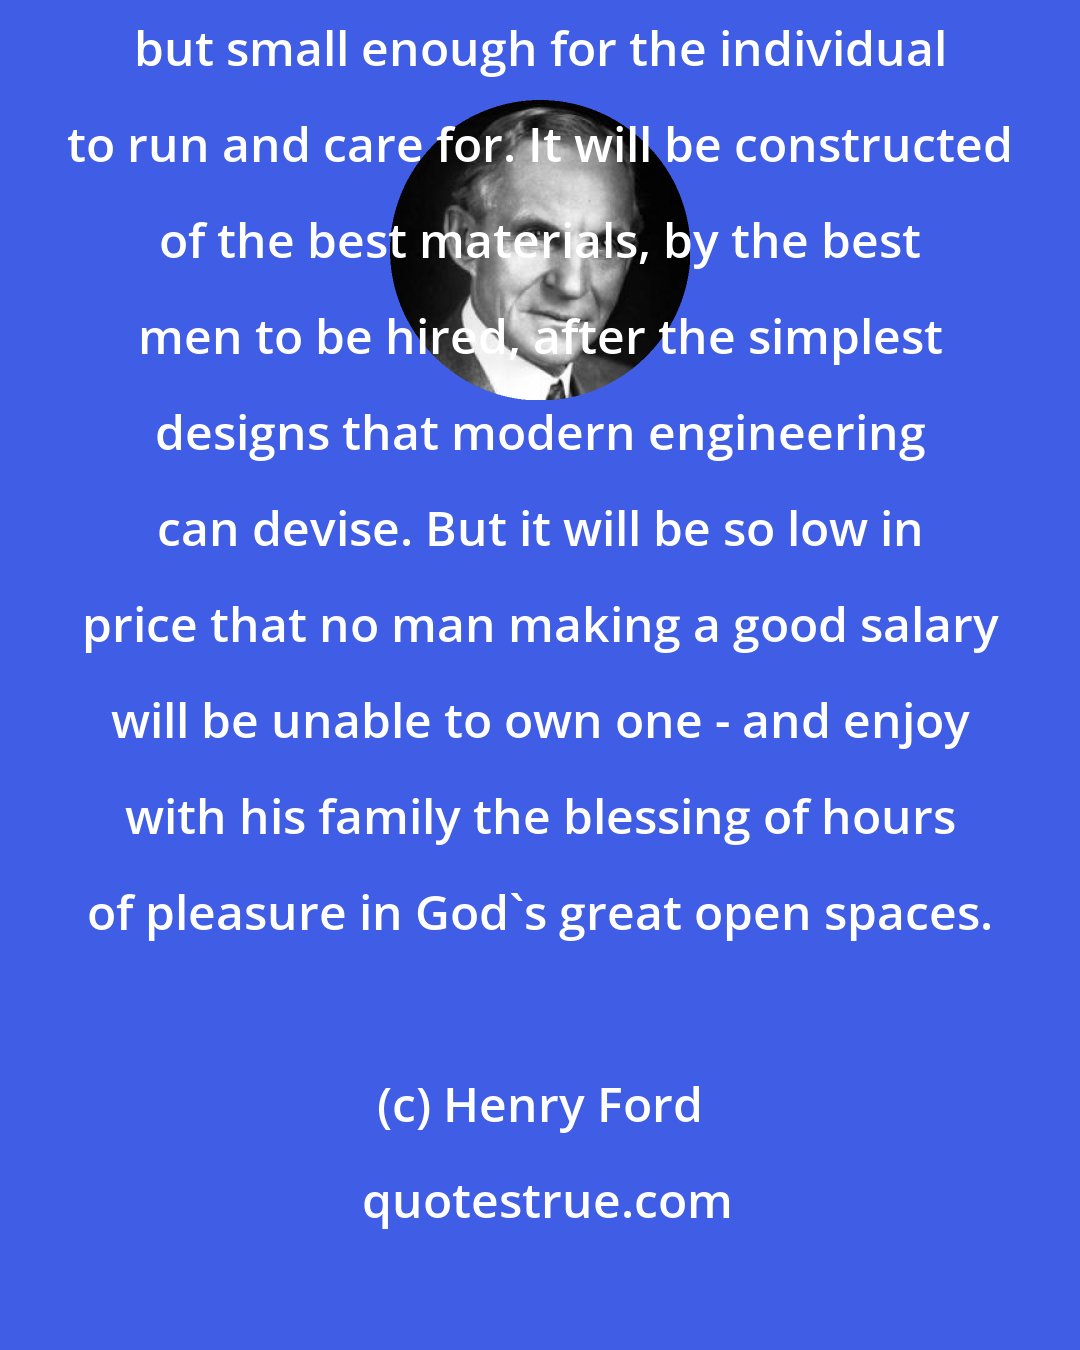 Henry Ford: I will build a car for the great multitude. It will be large enough for the family, but small enough for the individual to run and care for. It will be constructed of the best materials, by the best men to be hired, after the simplest designs that modern engineering can devise. But it will be so low in price that no man making a good salary will be unable to own one - and enjoy with his family the blessing of hours of pleasure in God's great open spaces.